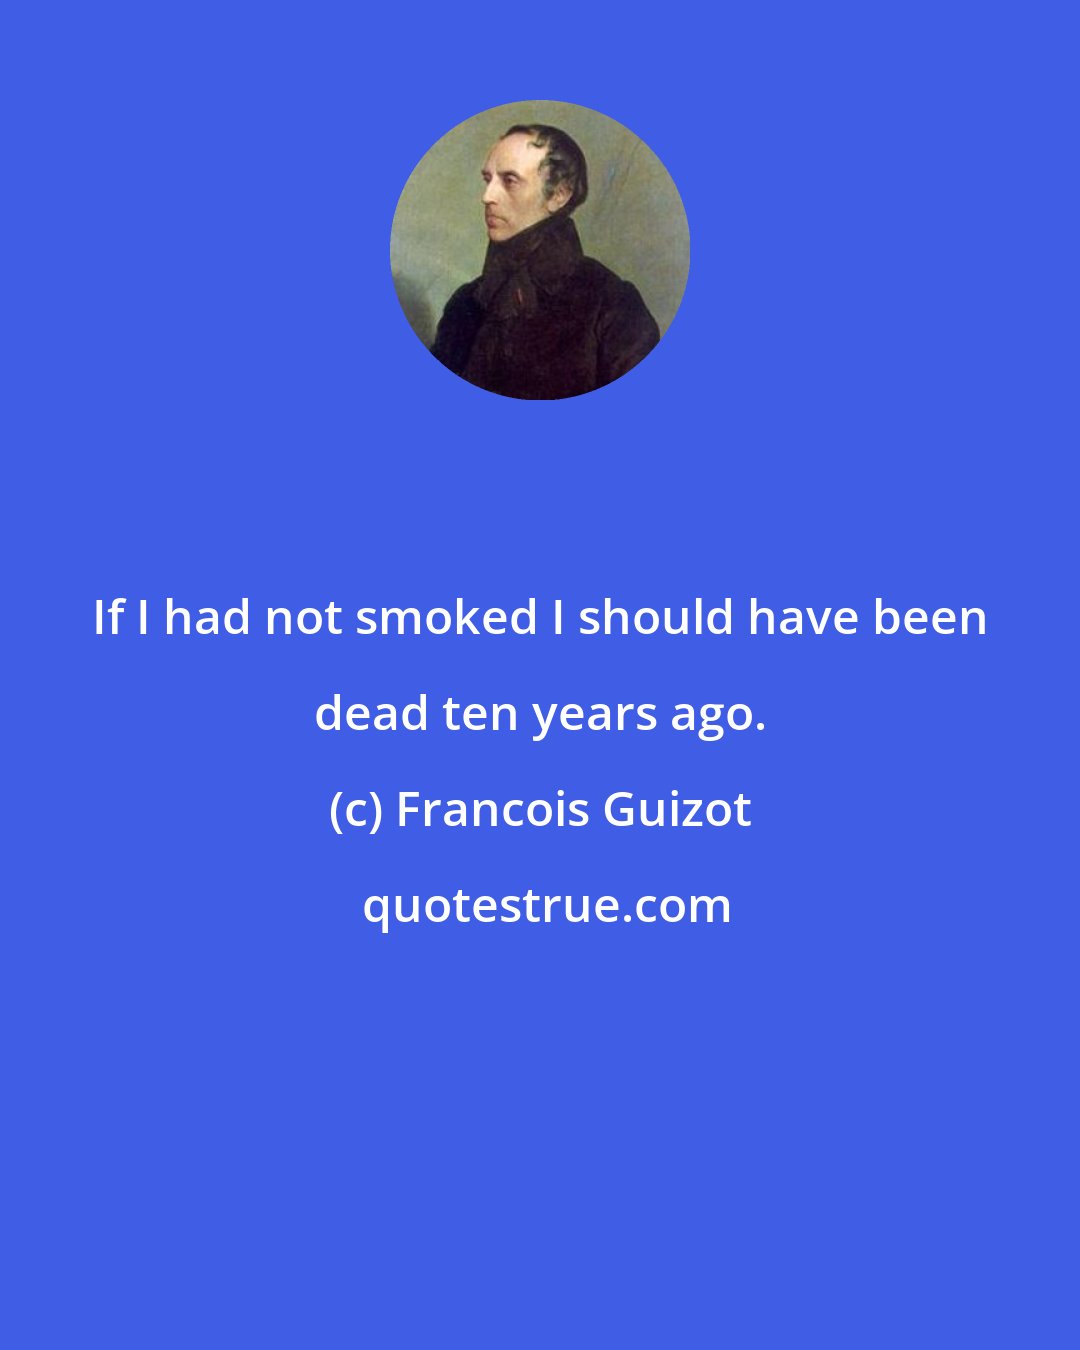 Francois Guizot: If I had not smoked I should have been dead ten years ago.